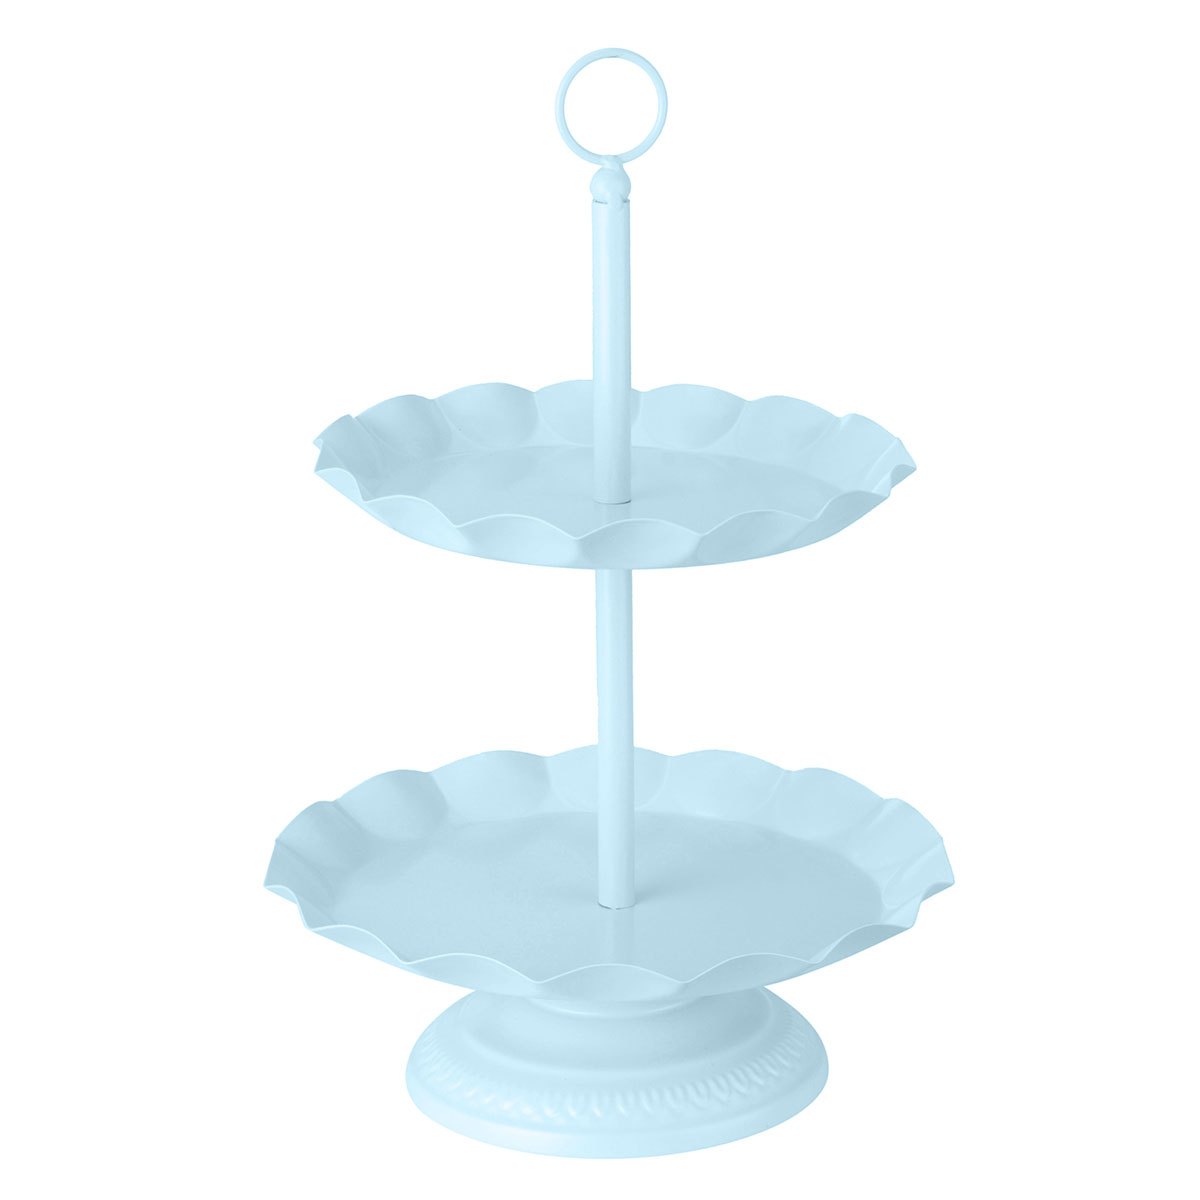 2--3-Ters-Blue-Cake-Holder-Cupcake-Stand-Birthday-Wedding-Party-Display-Holder-Decorations-1340743-9